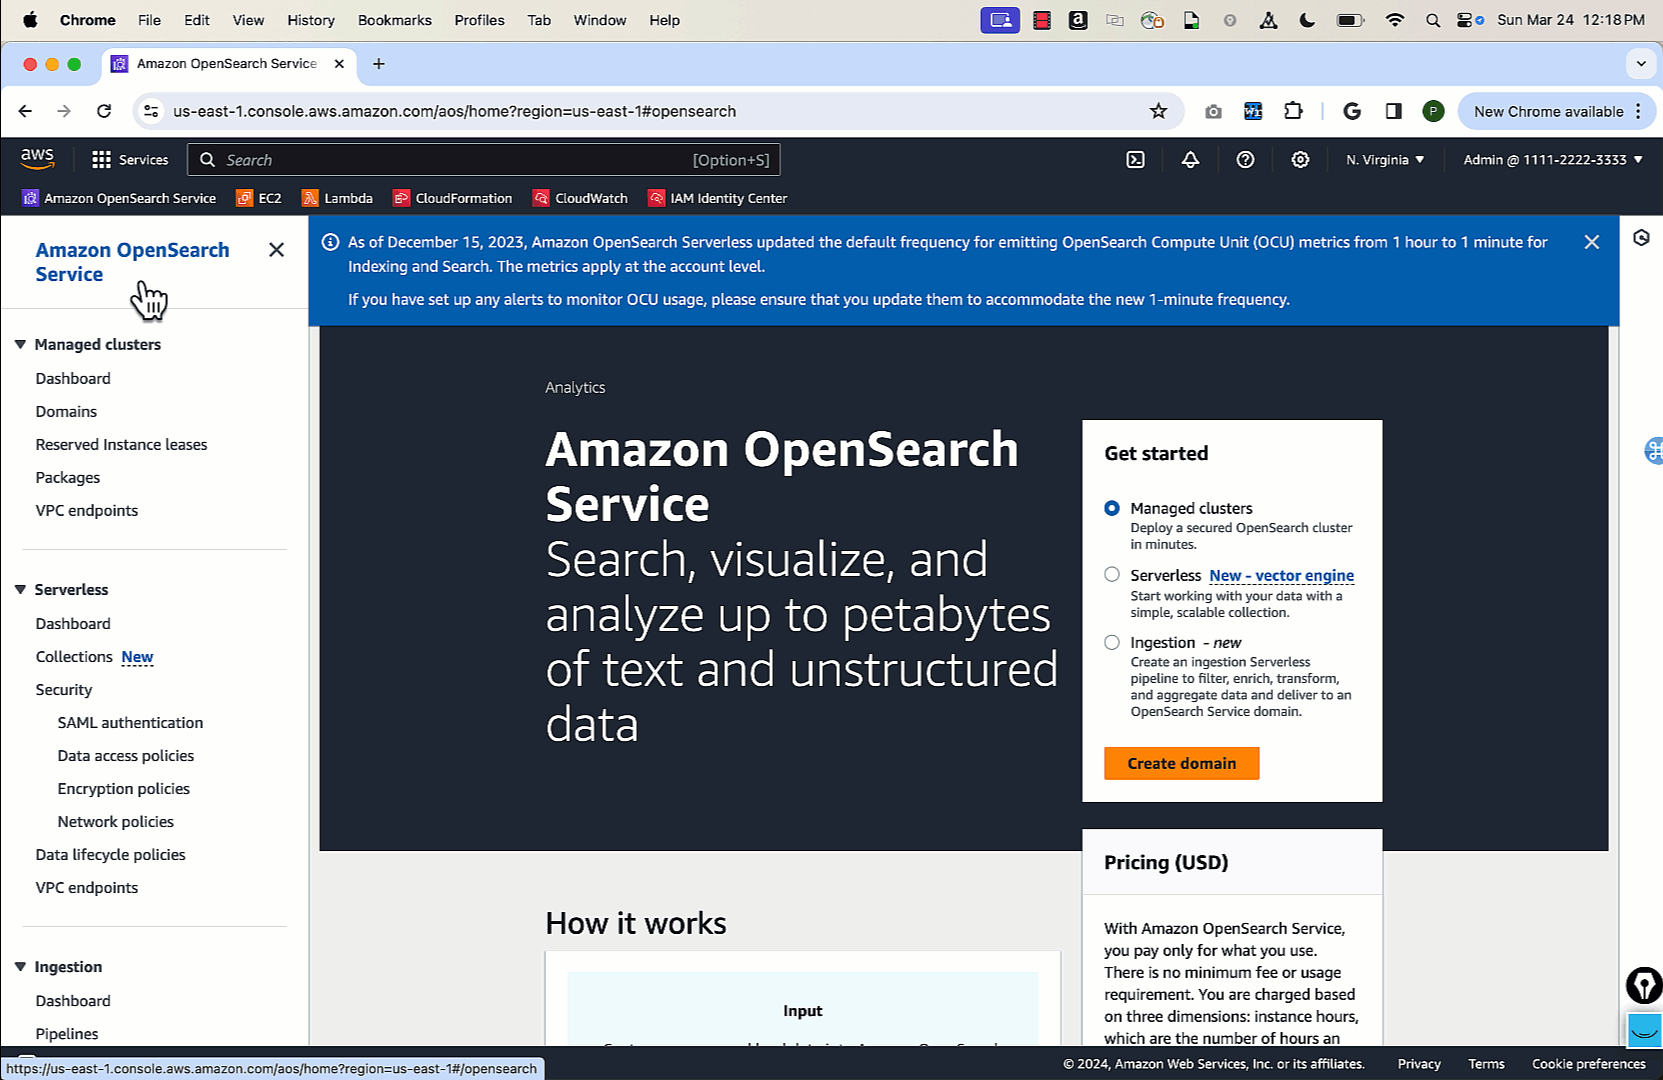 Analyze more demanding as well as larger time series workloads with Amazon OpenSearch Serverless  | Amazon Web Services